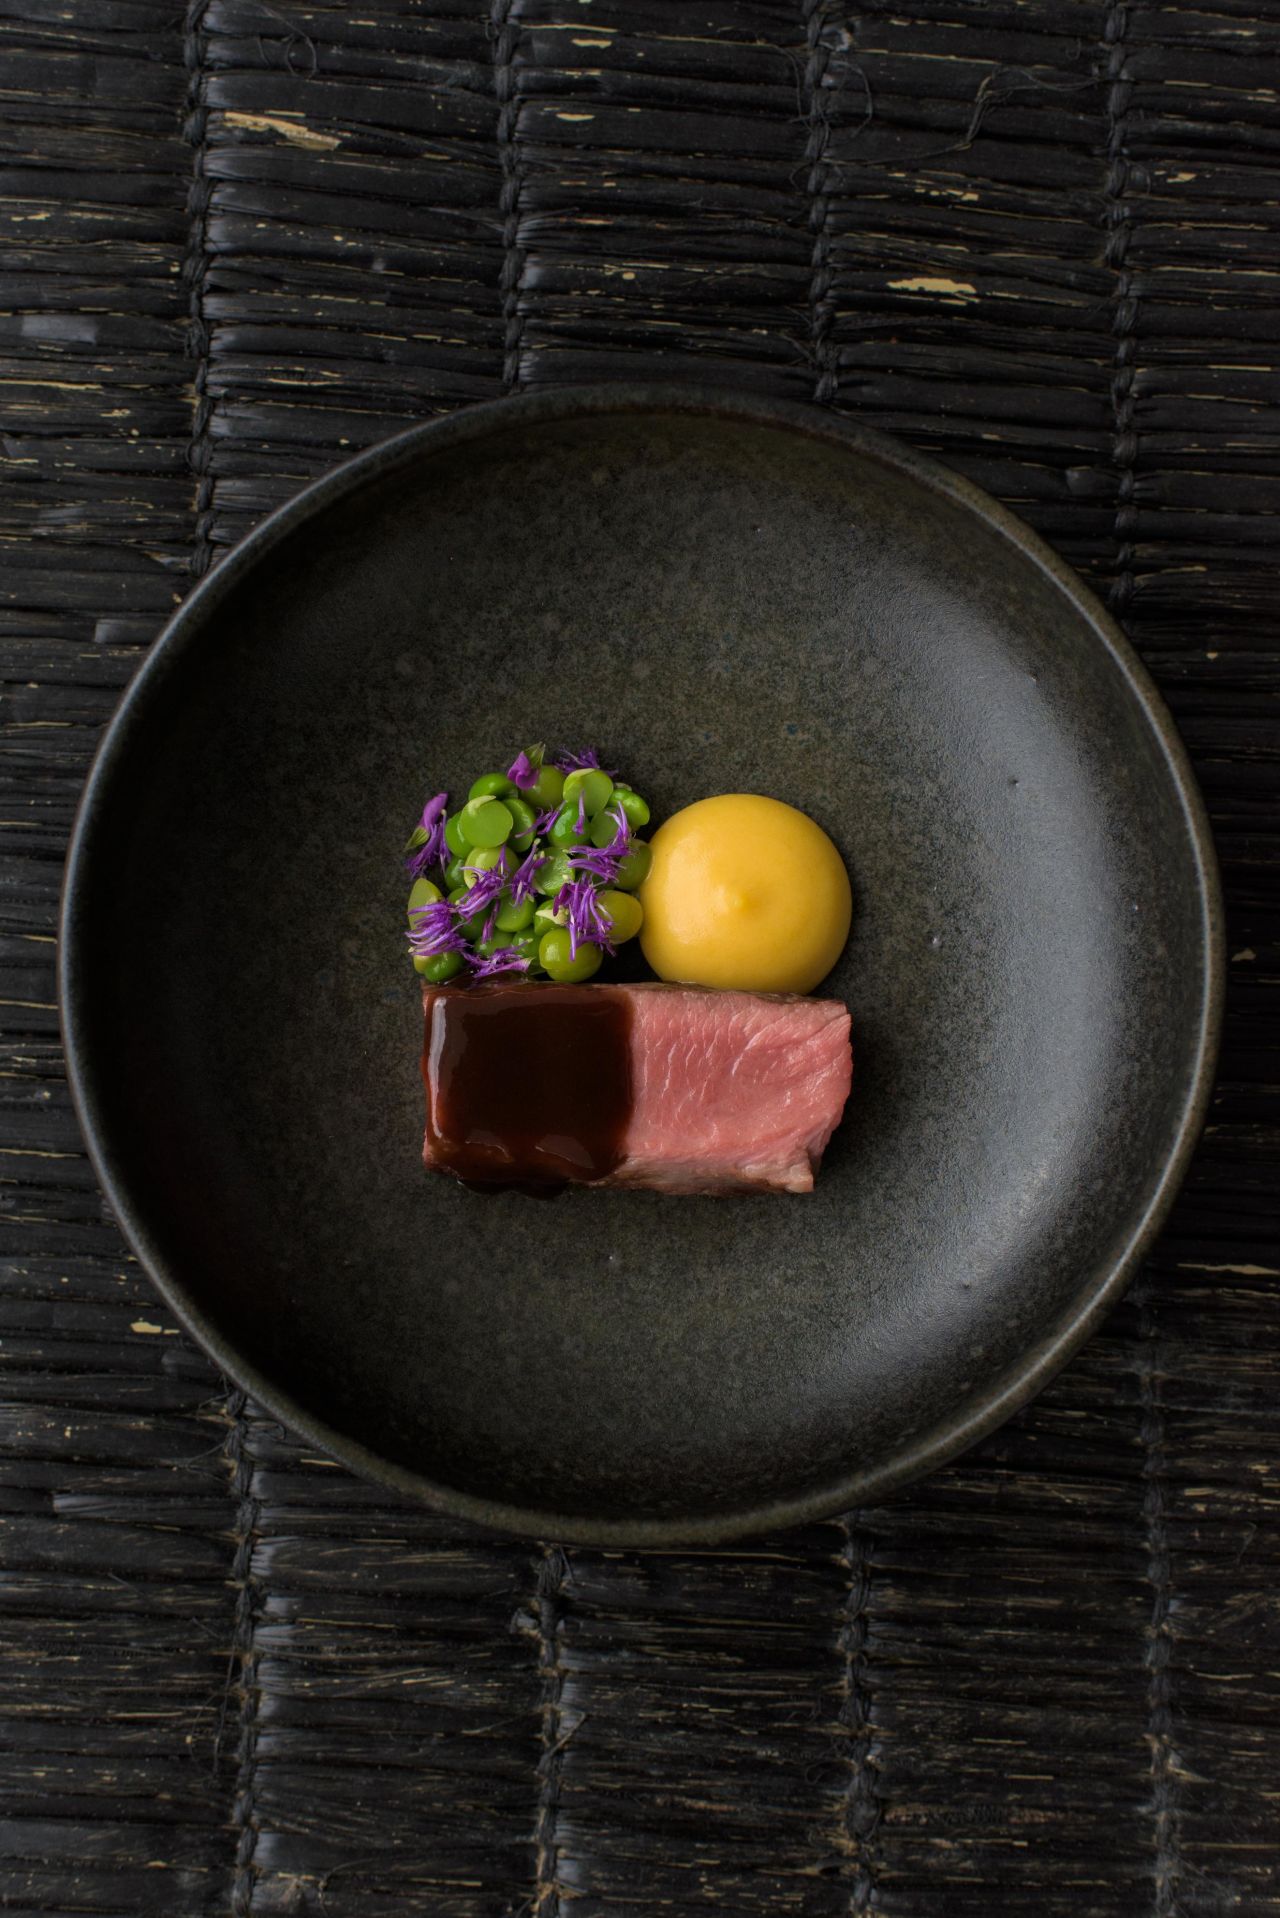 Inspired by Malonga's Congolese heritage, this dish highlights palm oil, a signature Congolese product, pureed with sweet potato, and served alongside Rwandan beef.